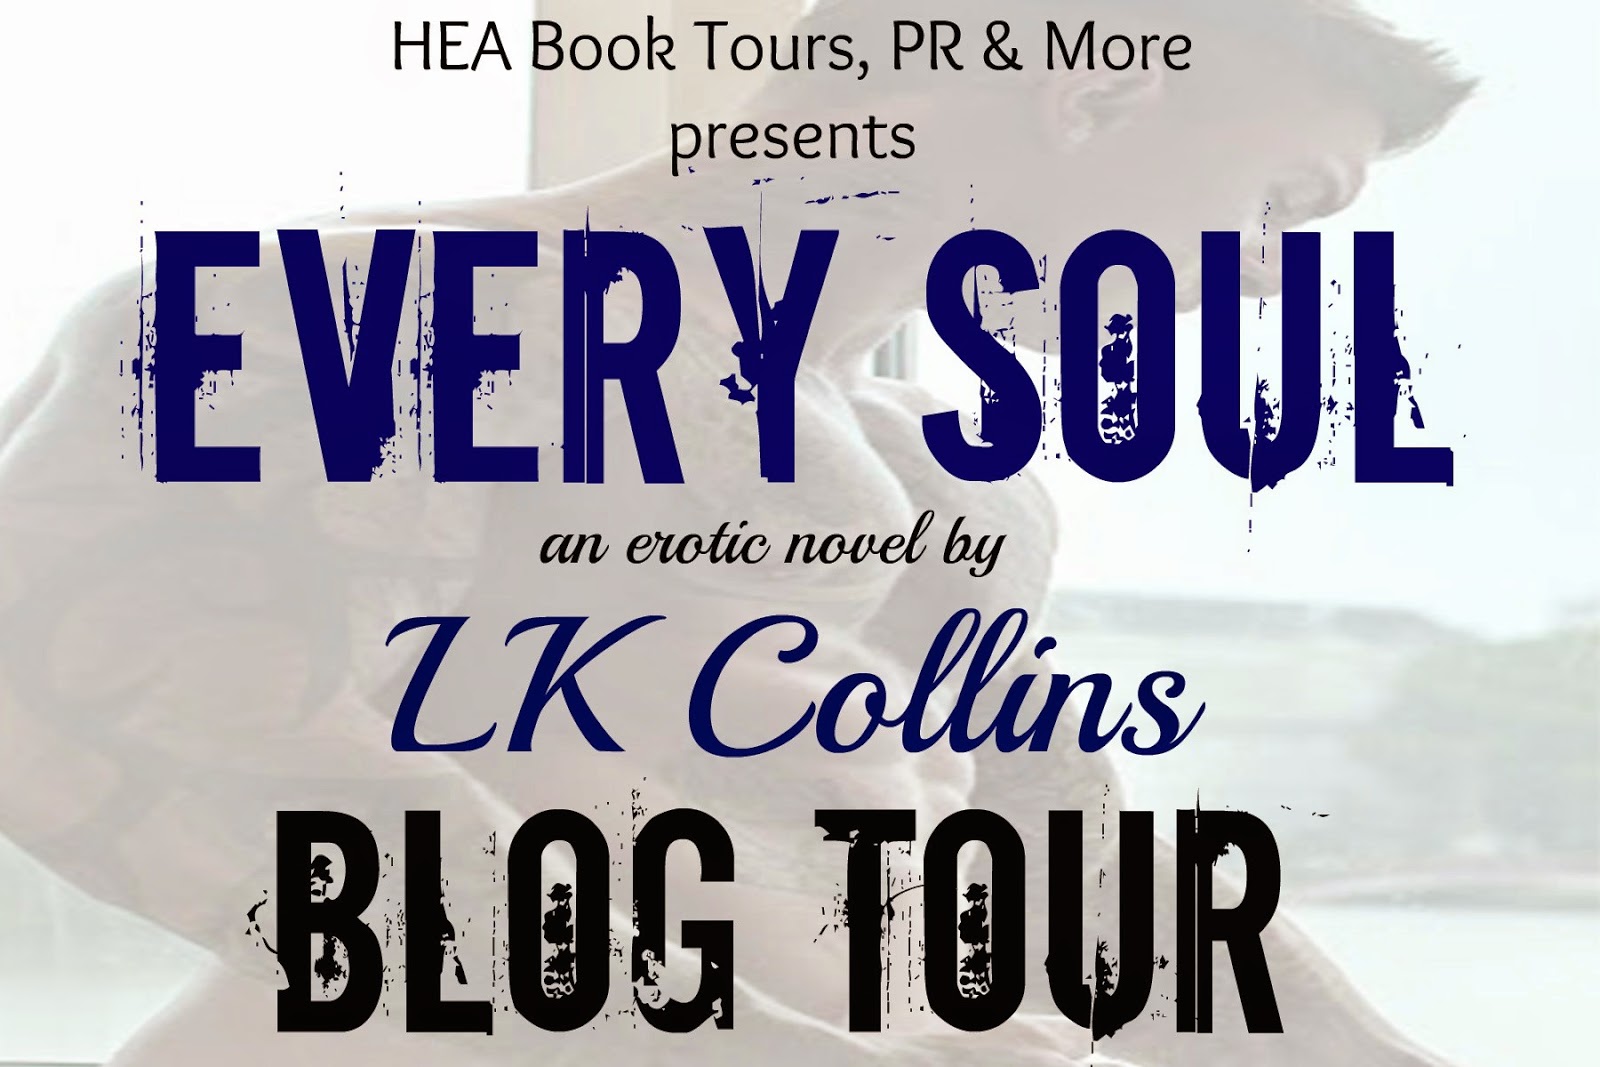 Every Soul by LK Collins Blog Tour Promo + Giveaway